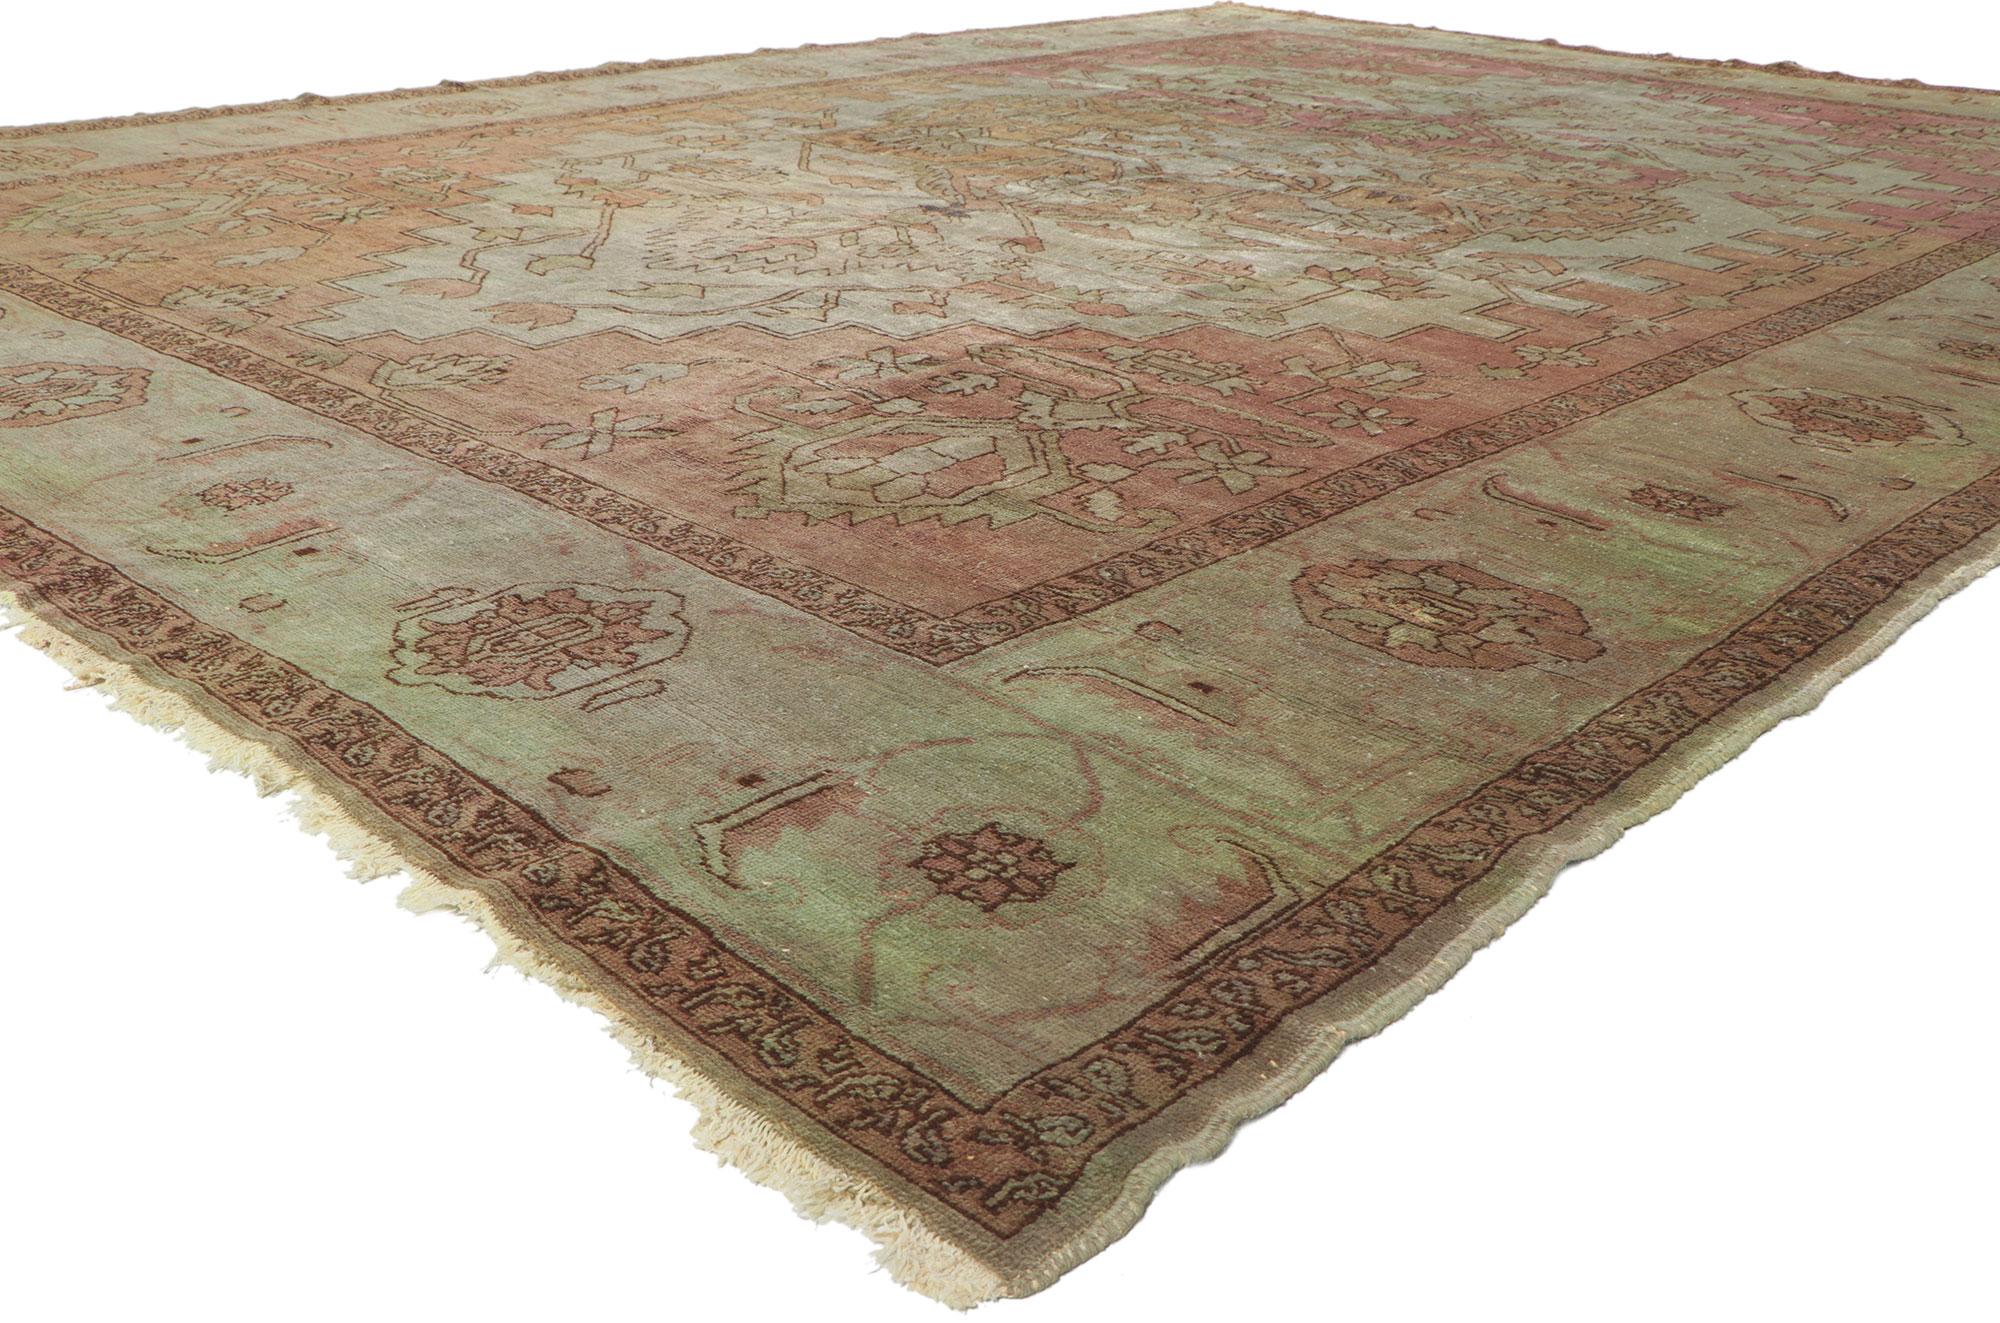 77664 Vintage Turkish Serapi Rug, 10'02 x 13'05.
With its rugged beauty and timeless design, this hand knotted wool vintage Turkish Serapi rug is poised to impress. The eye-catching geometric pattern and time-softened colors woven into this vintage